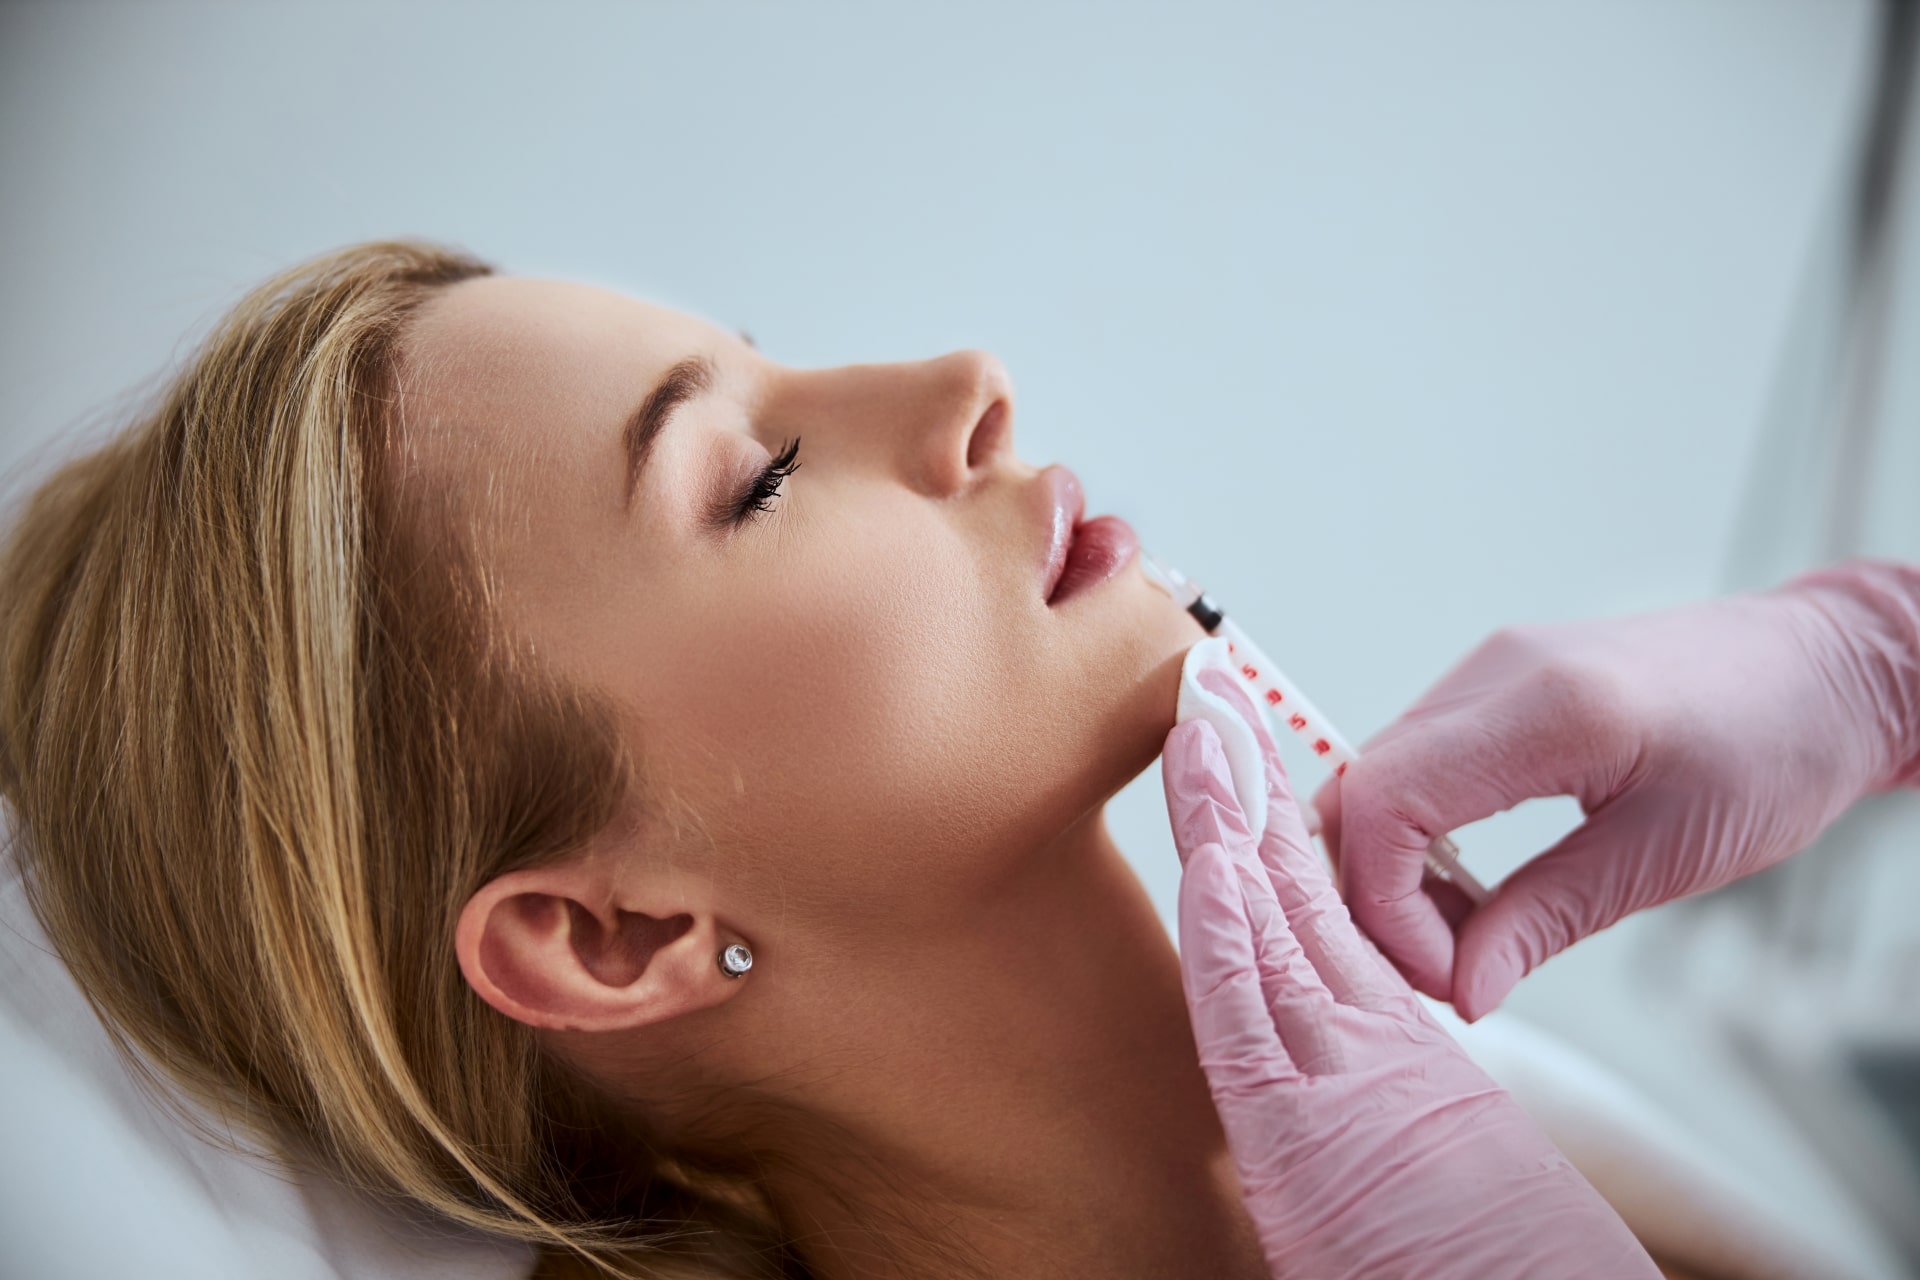 Botox and filler training